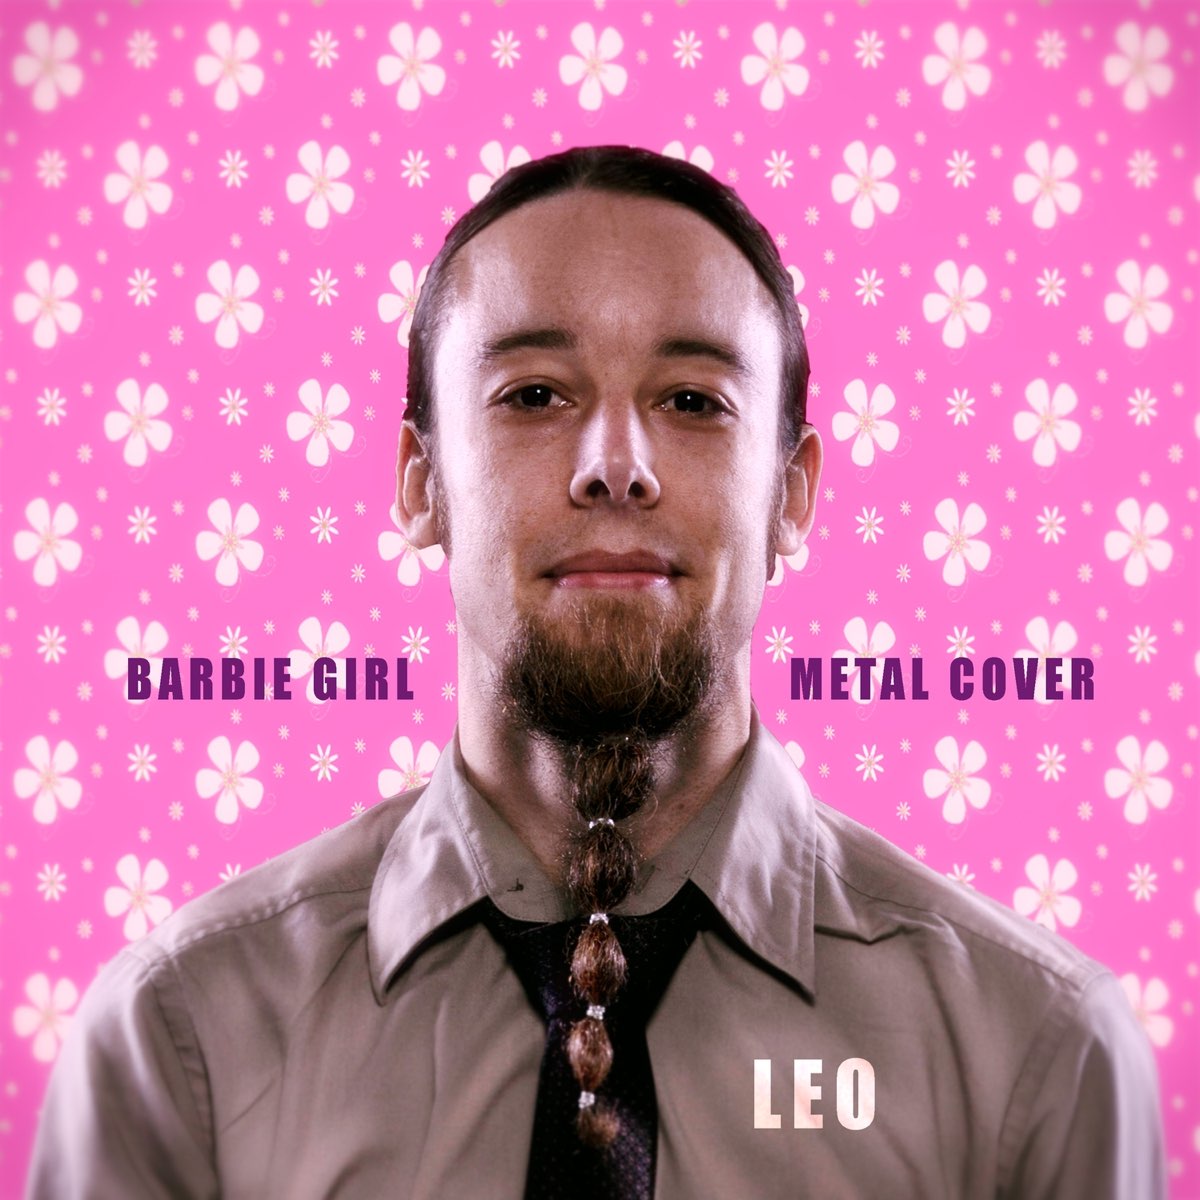 Barbie Girl (Metal Cover) - Single by Leo on Apple Music